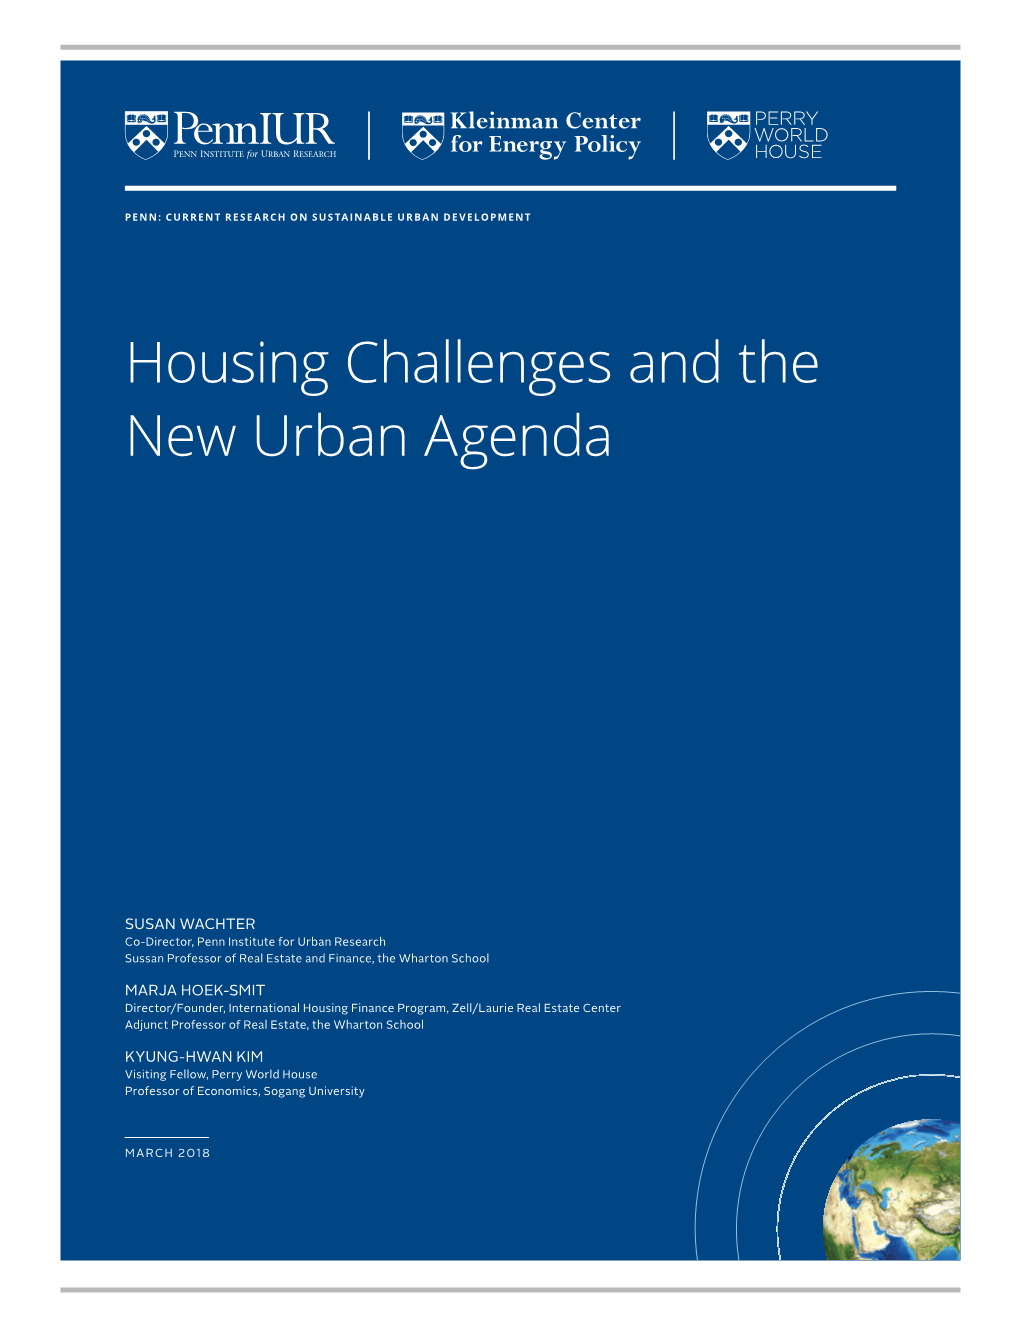 Housing Challenges and the New Urban Agenda